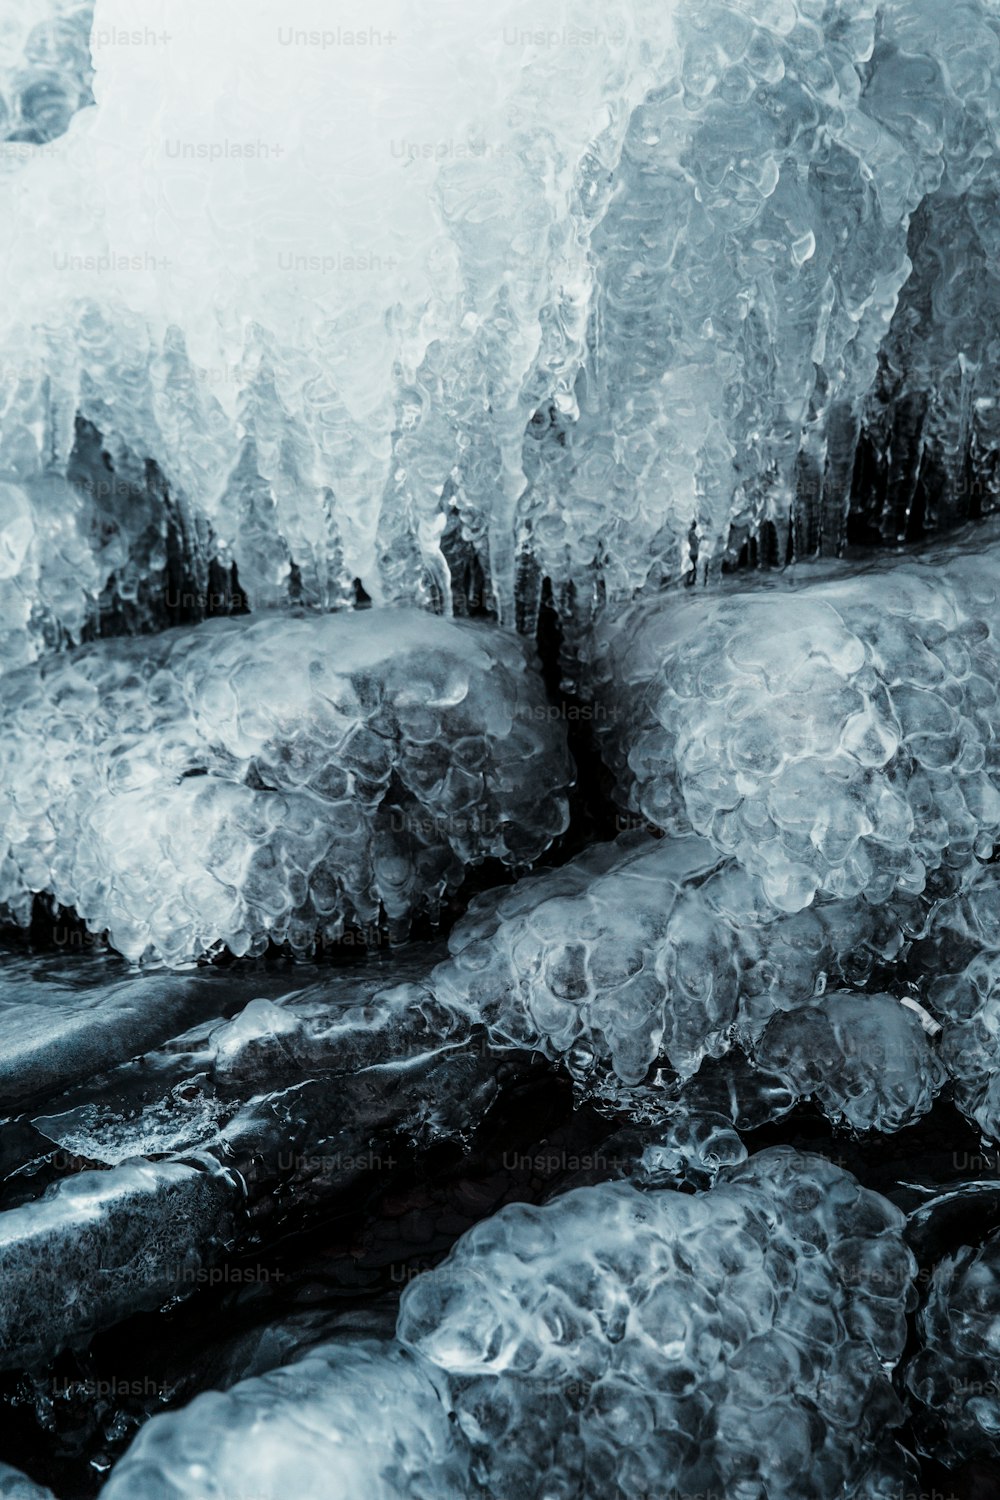 a black and white photo of ice and water